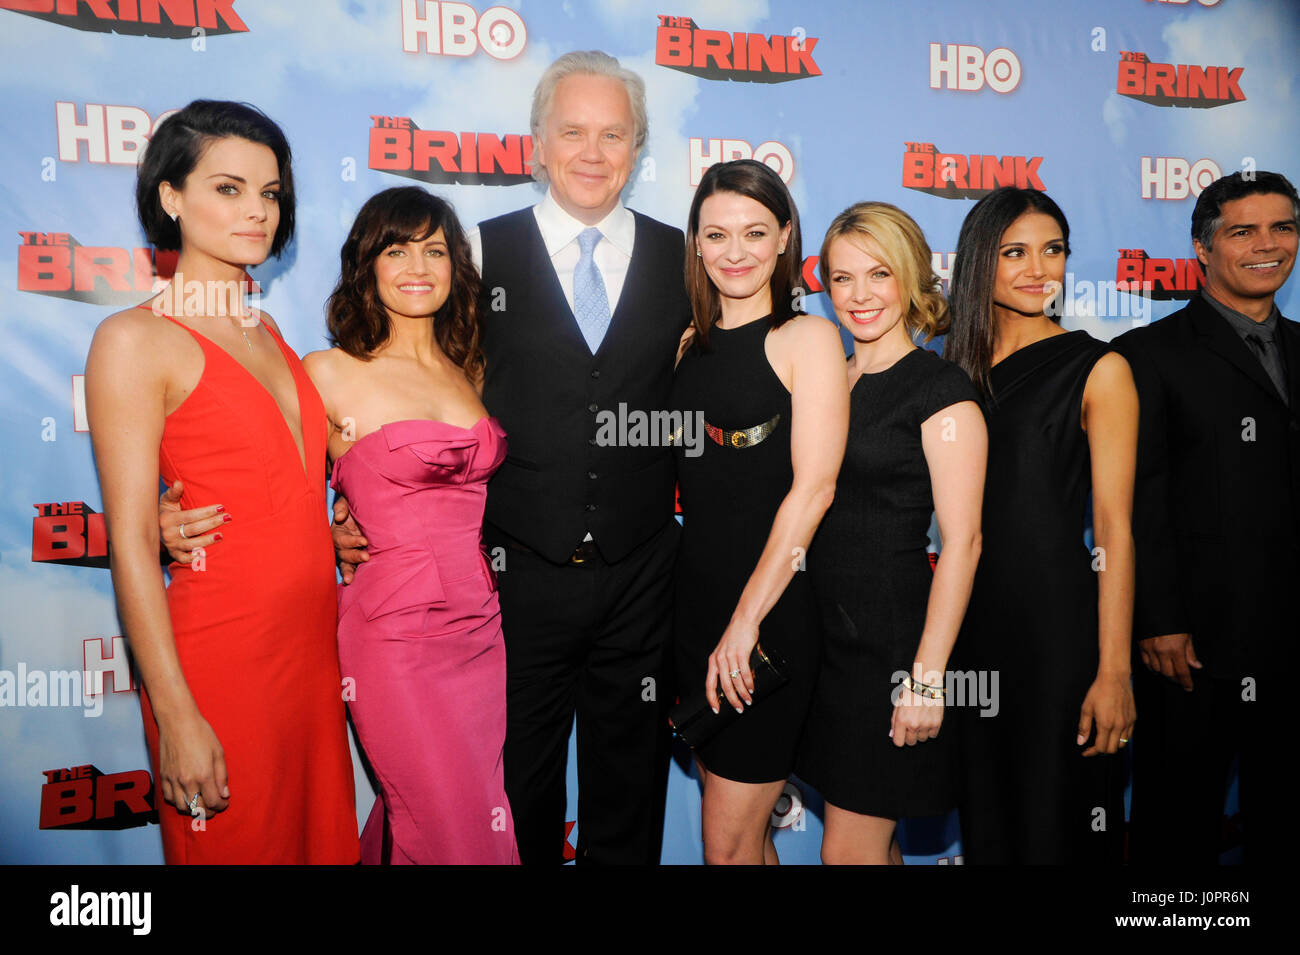 (L-R) Actresses Jaimie Alexander, Carla Gugino, actor Tim Robbins, actresses Maribeth Monroe, Mary Faber and Melanie Kannokada attend HBO 'The Brink' Los Angeles Premiere at Paramount Theater on Paramount Studios lot on June 8th, 2015 in Los Angeles, Cali Stock Photo